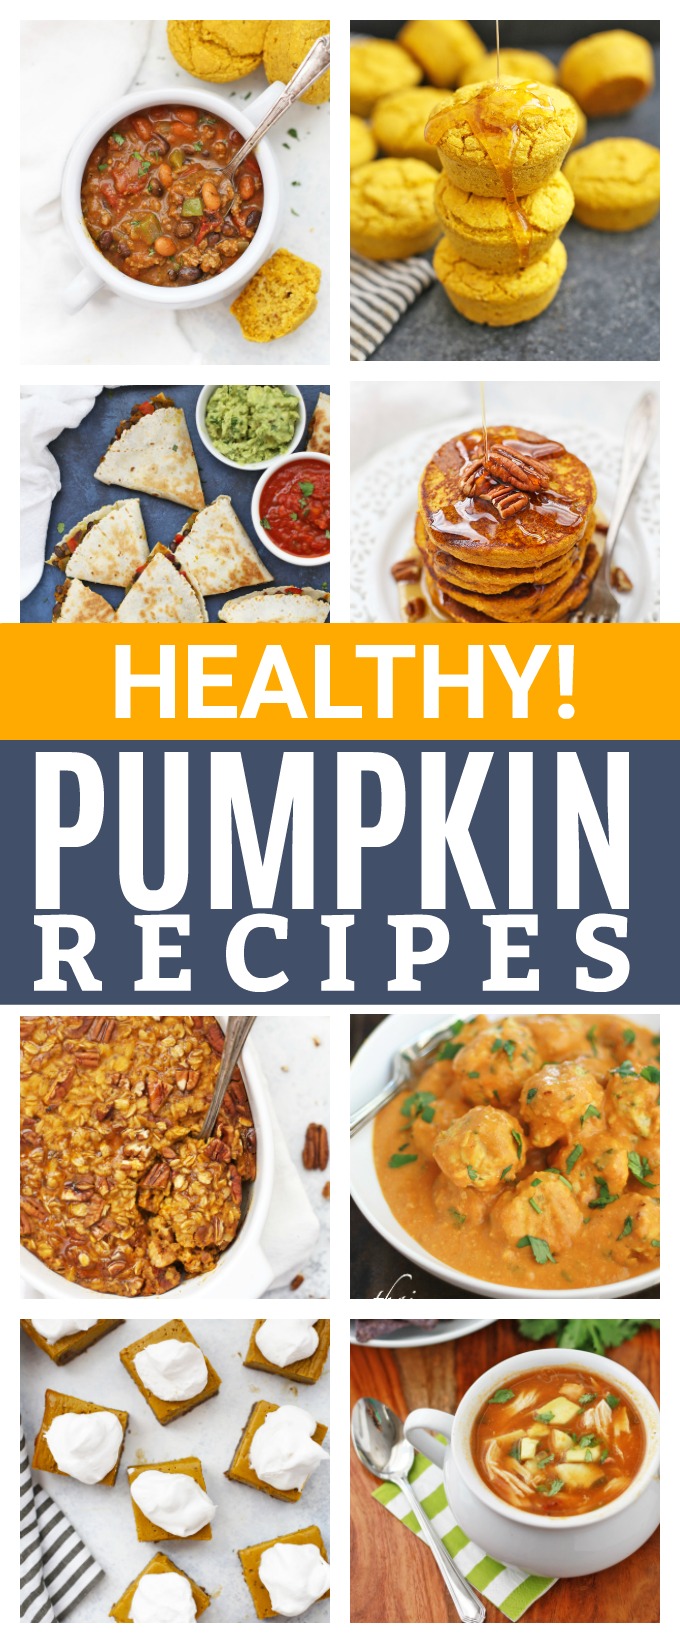 The best HEALTHY Pumpkin Recipes to make this season! Gluten free, vegan, and paleo options!